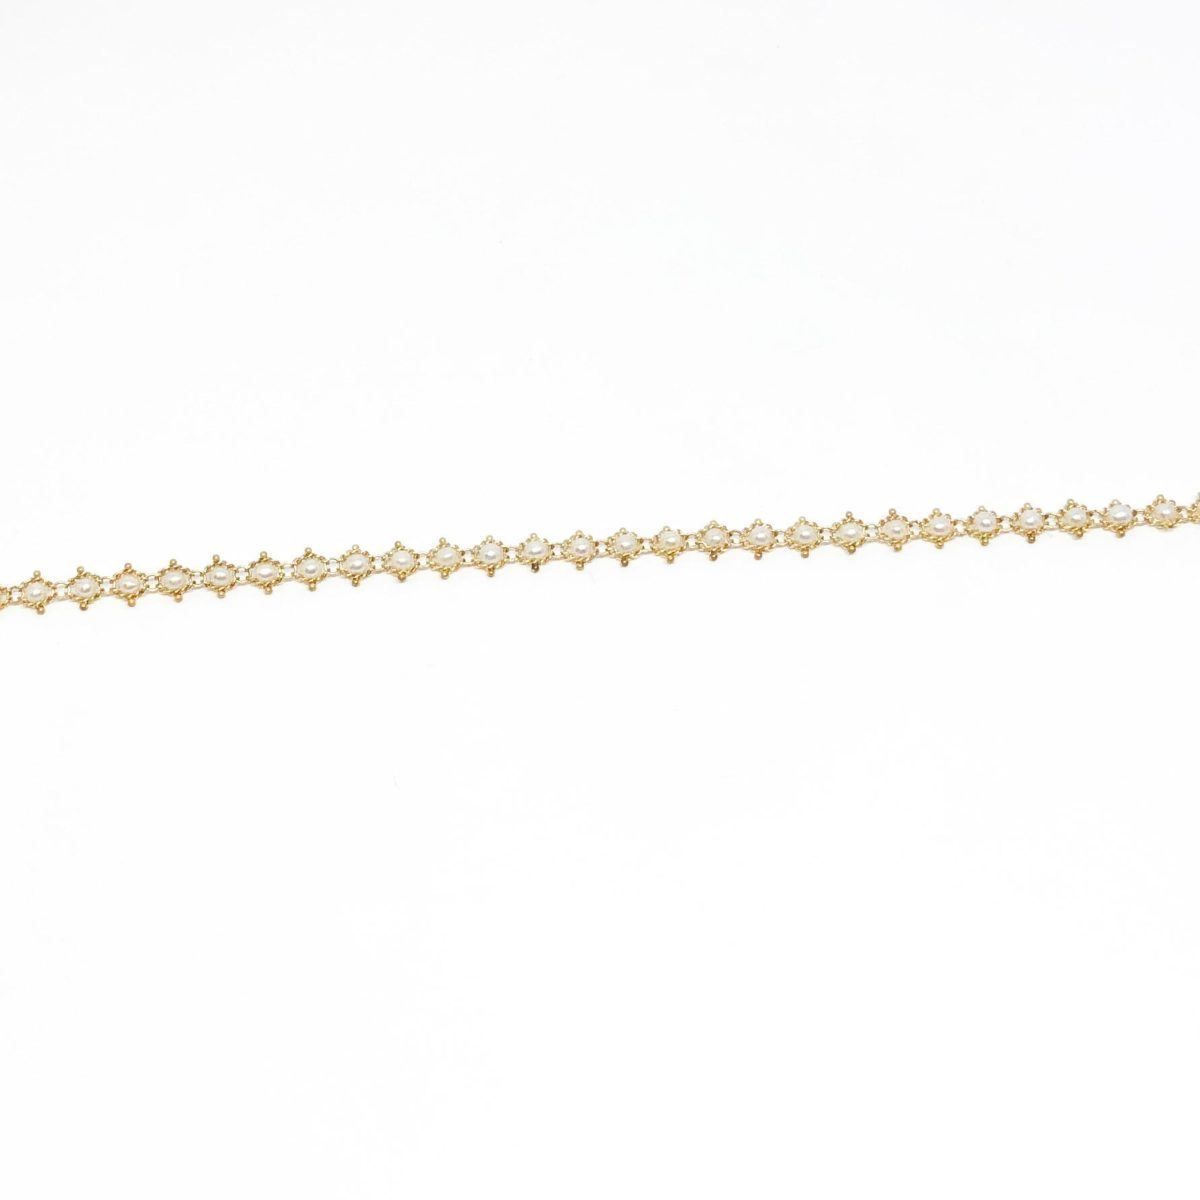 Yellow Gold and Pearl Textile Braid Bracelet